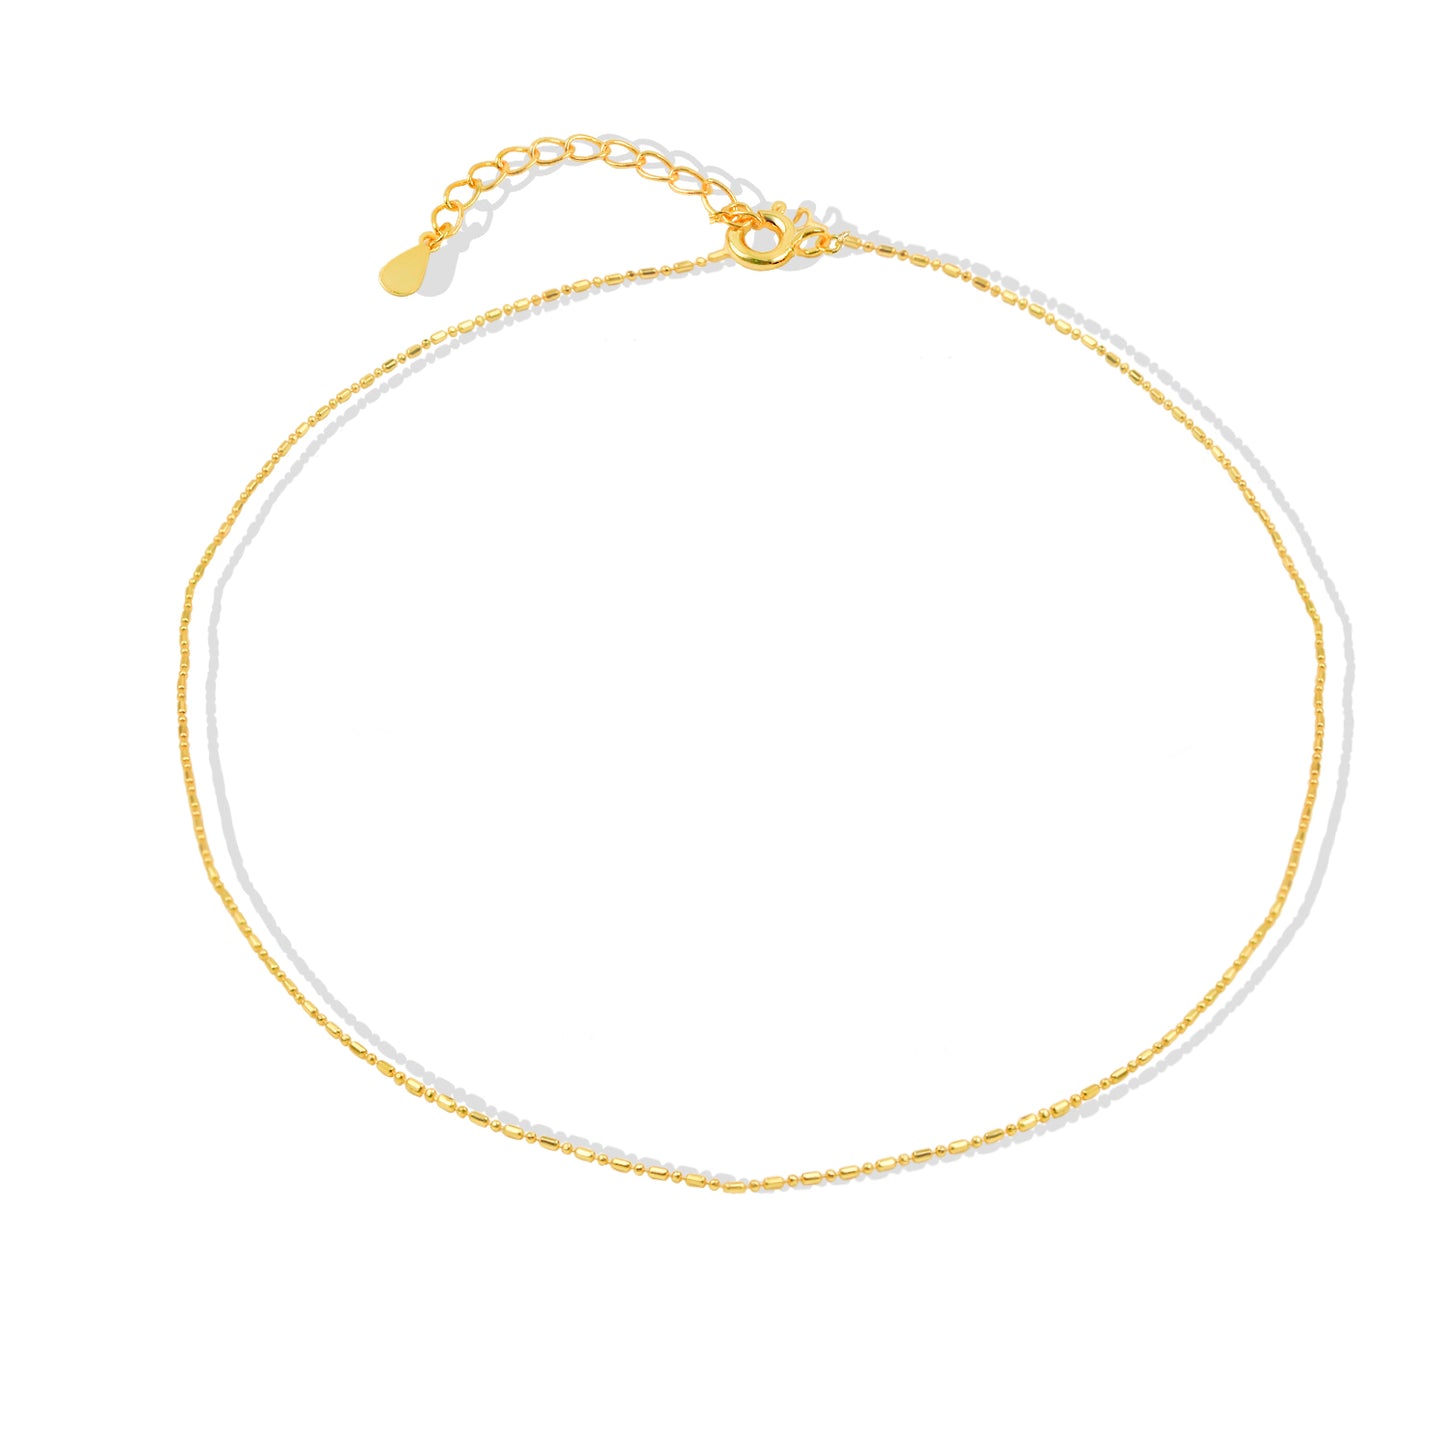 The Petra Dainty Chain